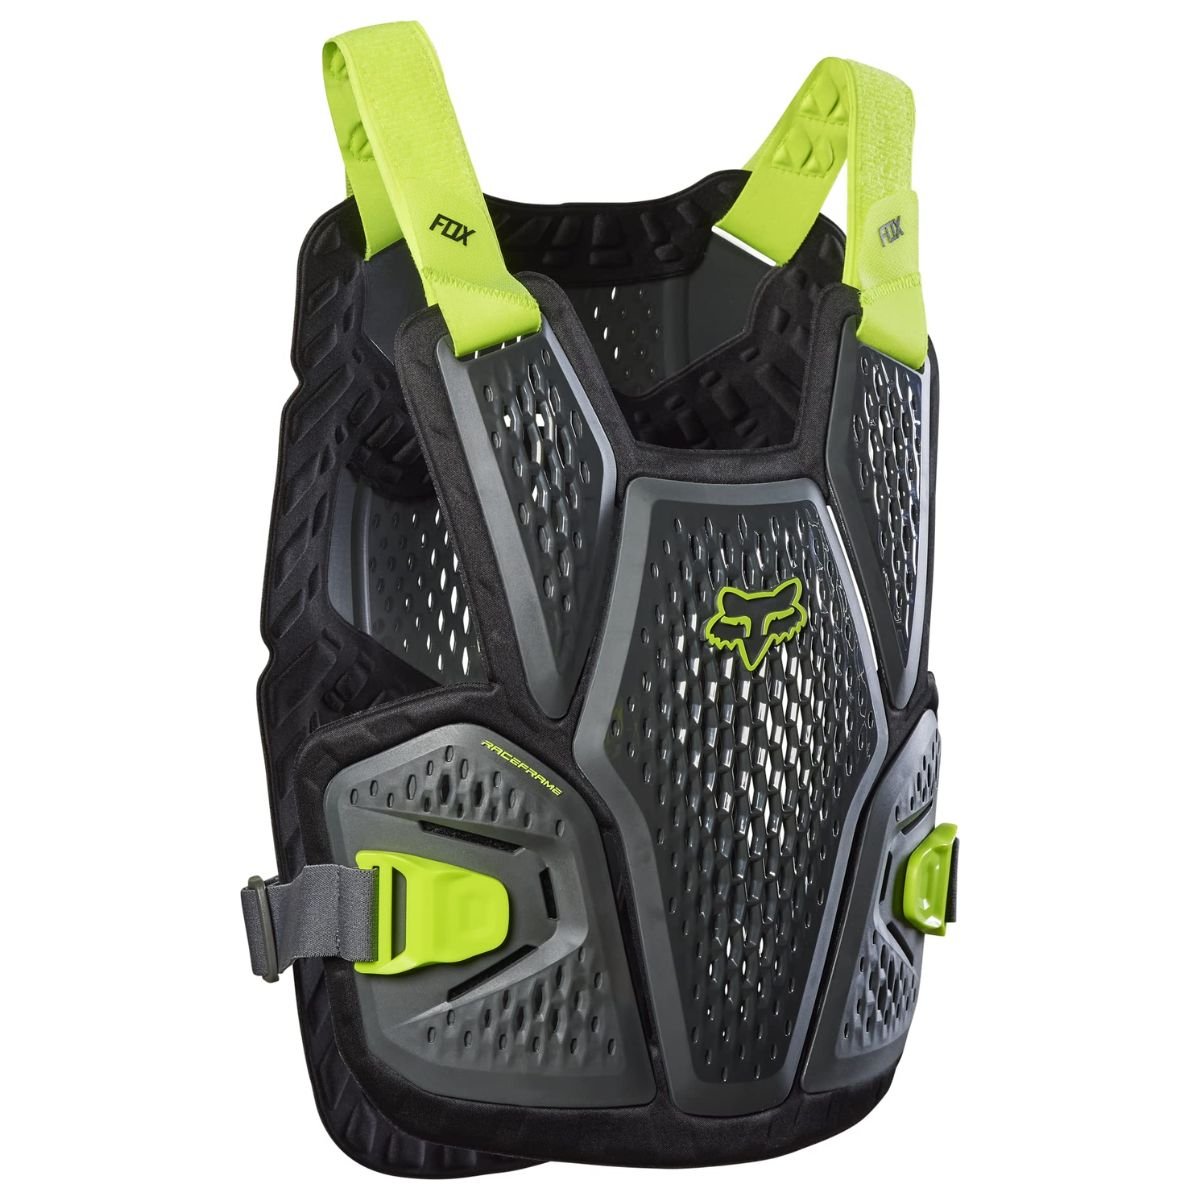 Fox YTH Raceframe Roost Body Protection for Children